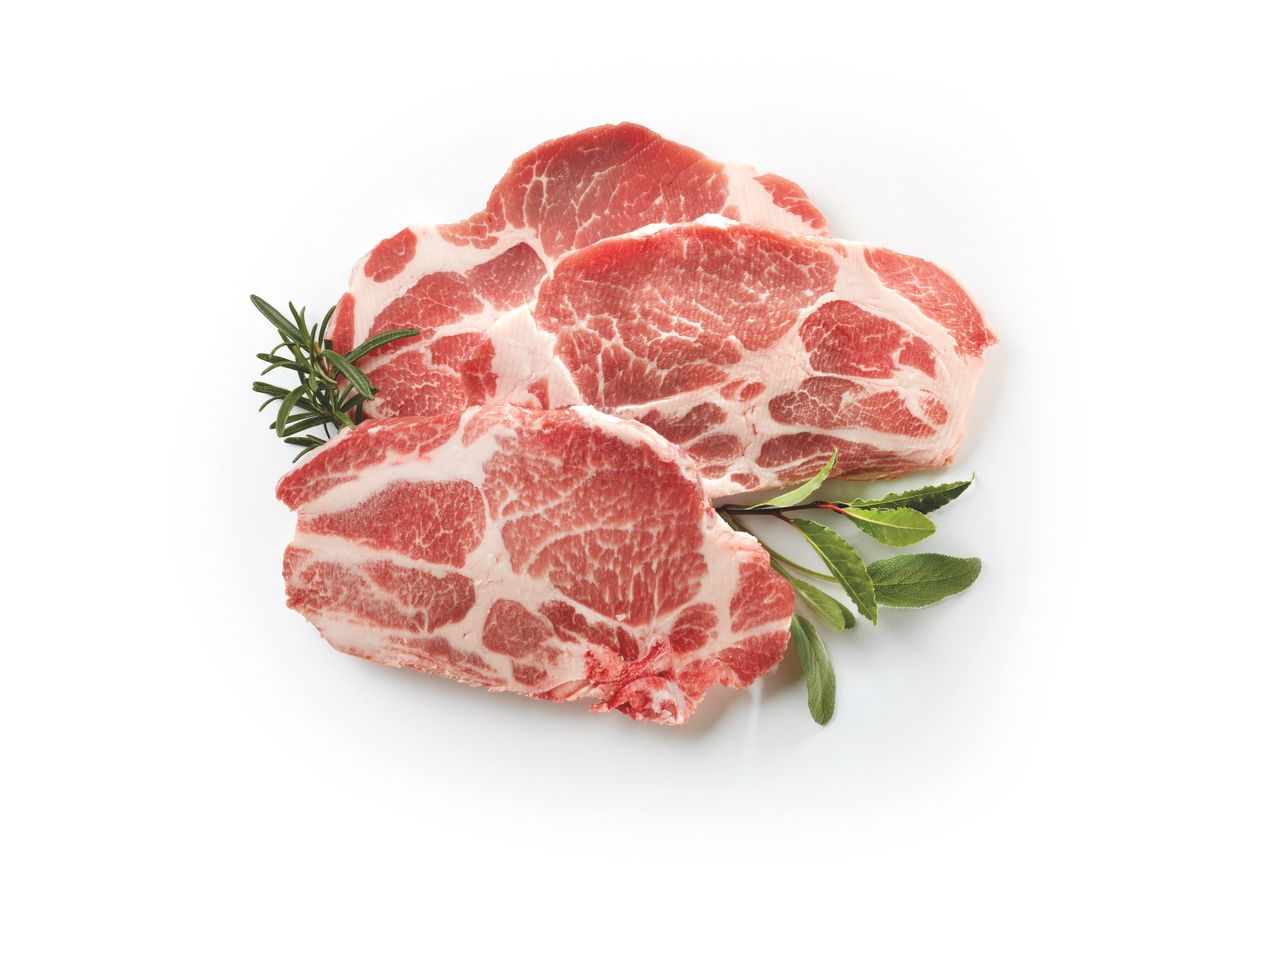 Go to full screen view: Pork Collar Chops - Image 1